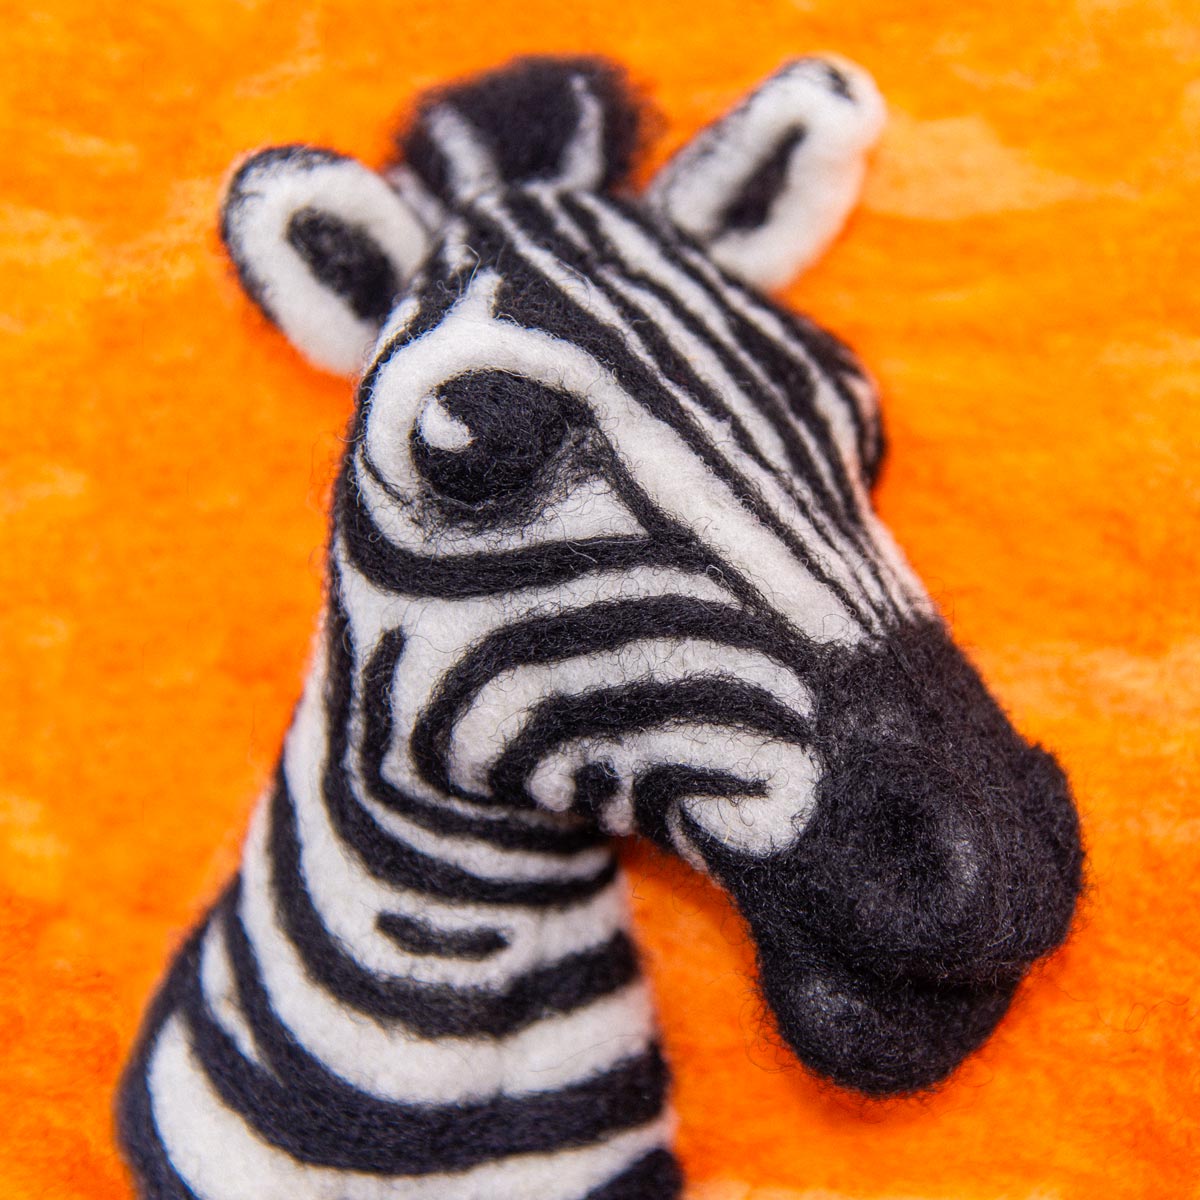 Zabra- Needle Felted Illustration for Hillary Dow's ABC picture book